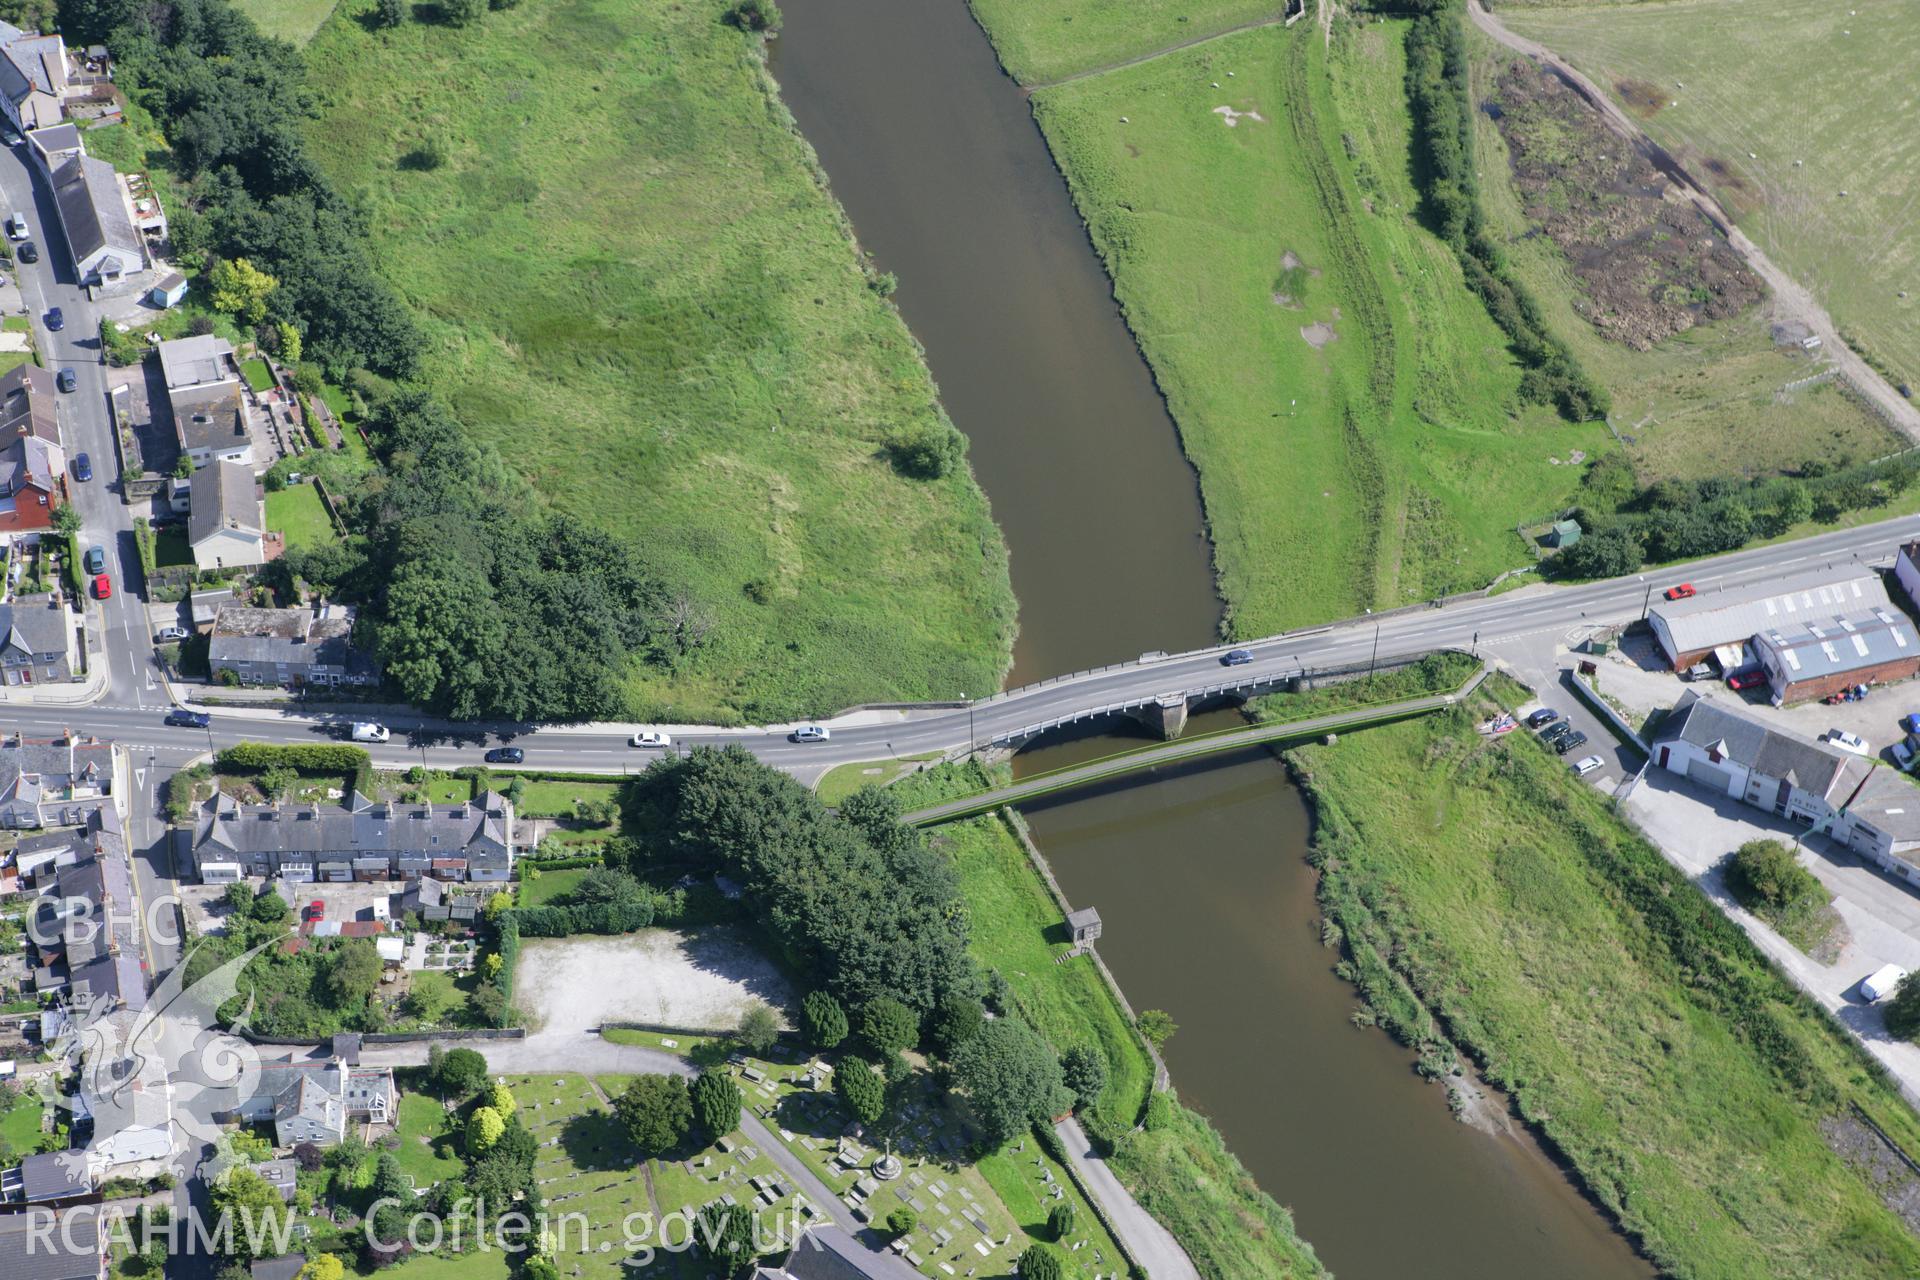 RCAHMW colour oblique aerial photograph of Rhuddlan Bridge. Taken on 31 July 2007 by Toby Driver